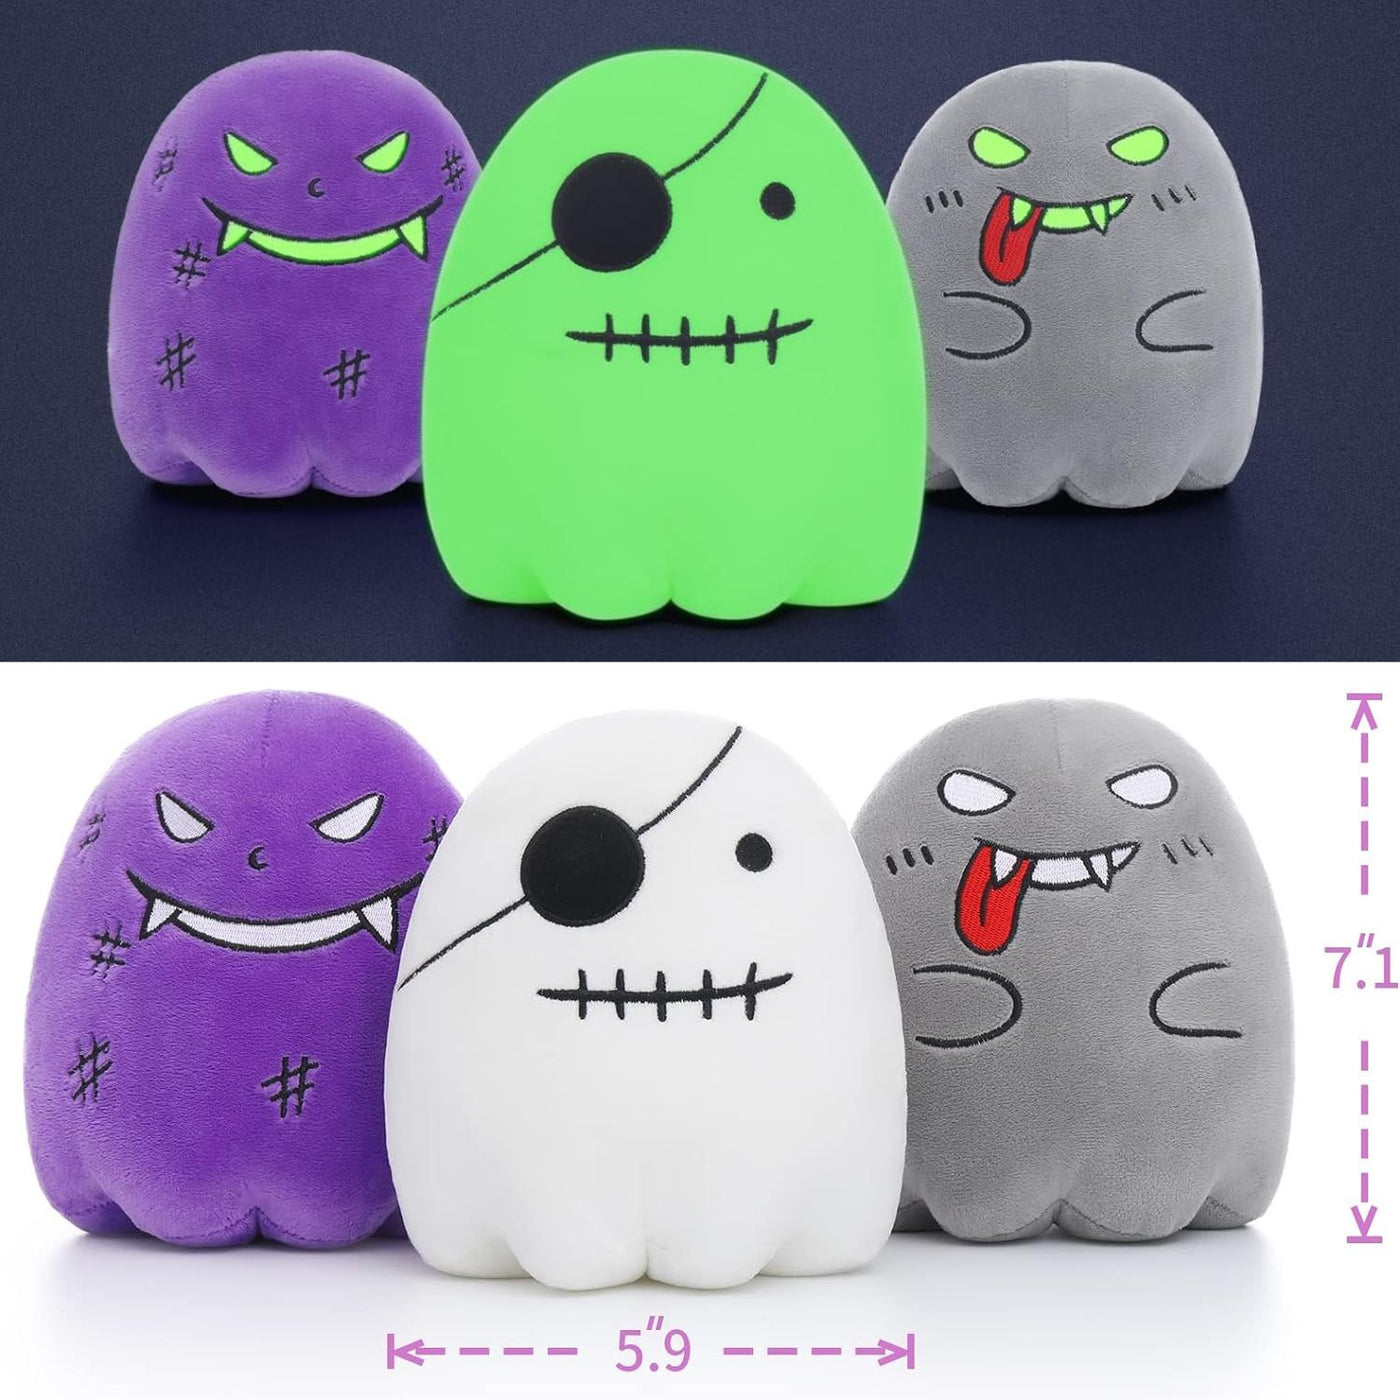 3 Pack Halloween Ghost Stuffed Toy Set, 7.1 Inches